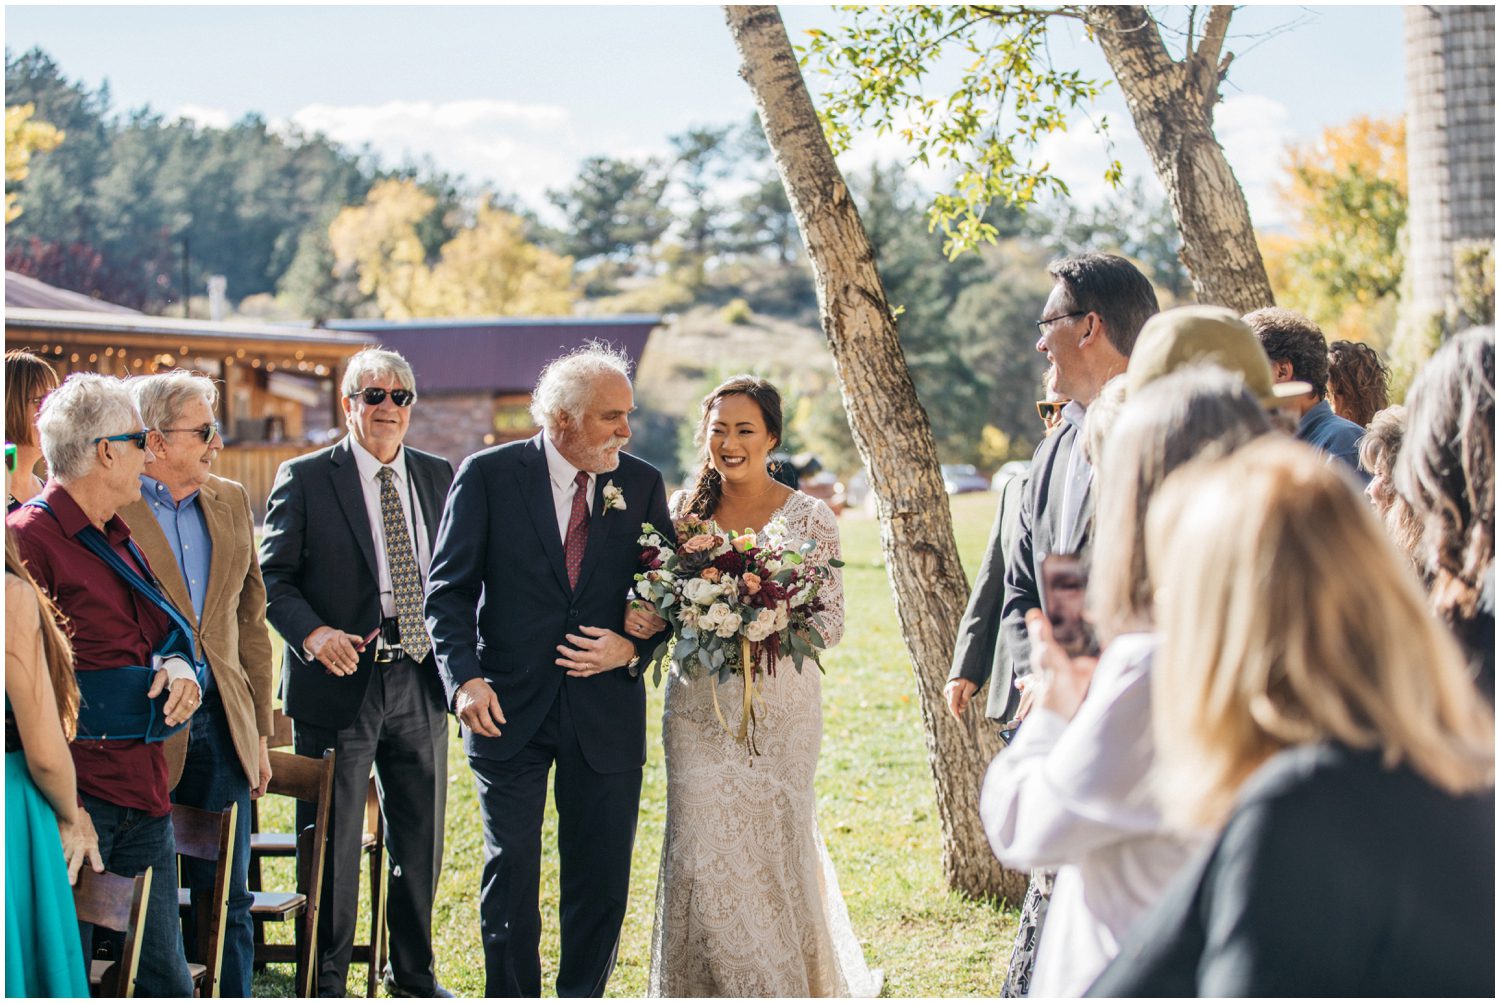 Father walking bride down the aisle, bride and father, Father giving away the bride, First look with dad, wedding first look with dad, Planet Bluegrass Wedding, Lyons Colorado Wedding, Lace and Lillies, Colorado Wedding Photographer, A Spice of Life, Boho Wedding Inspiration, Burgundy wedding inspiration, Colorado Wedding